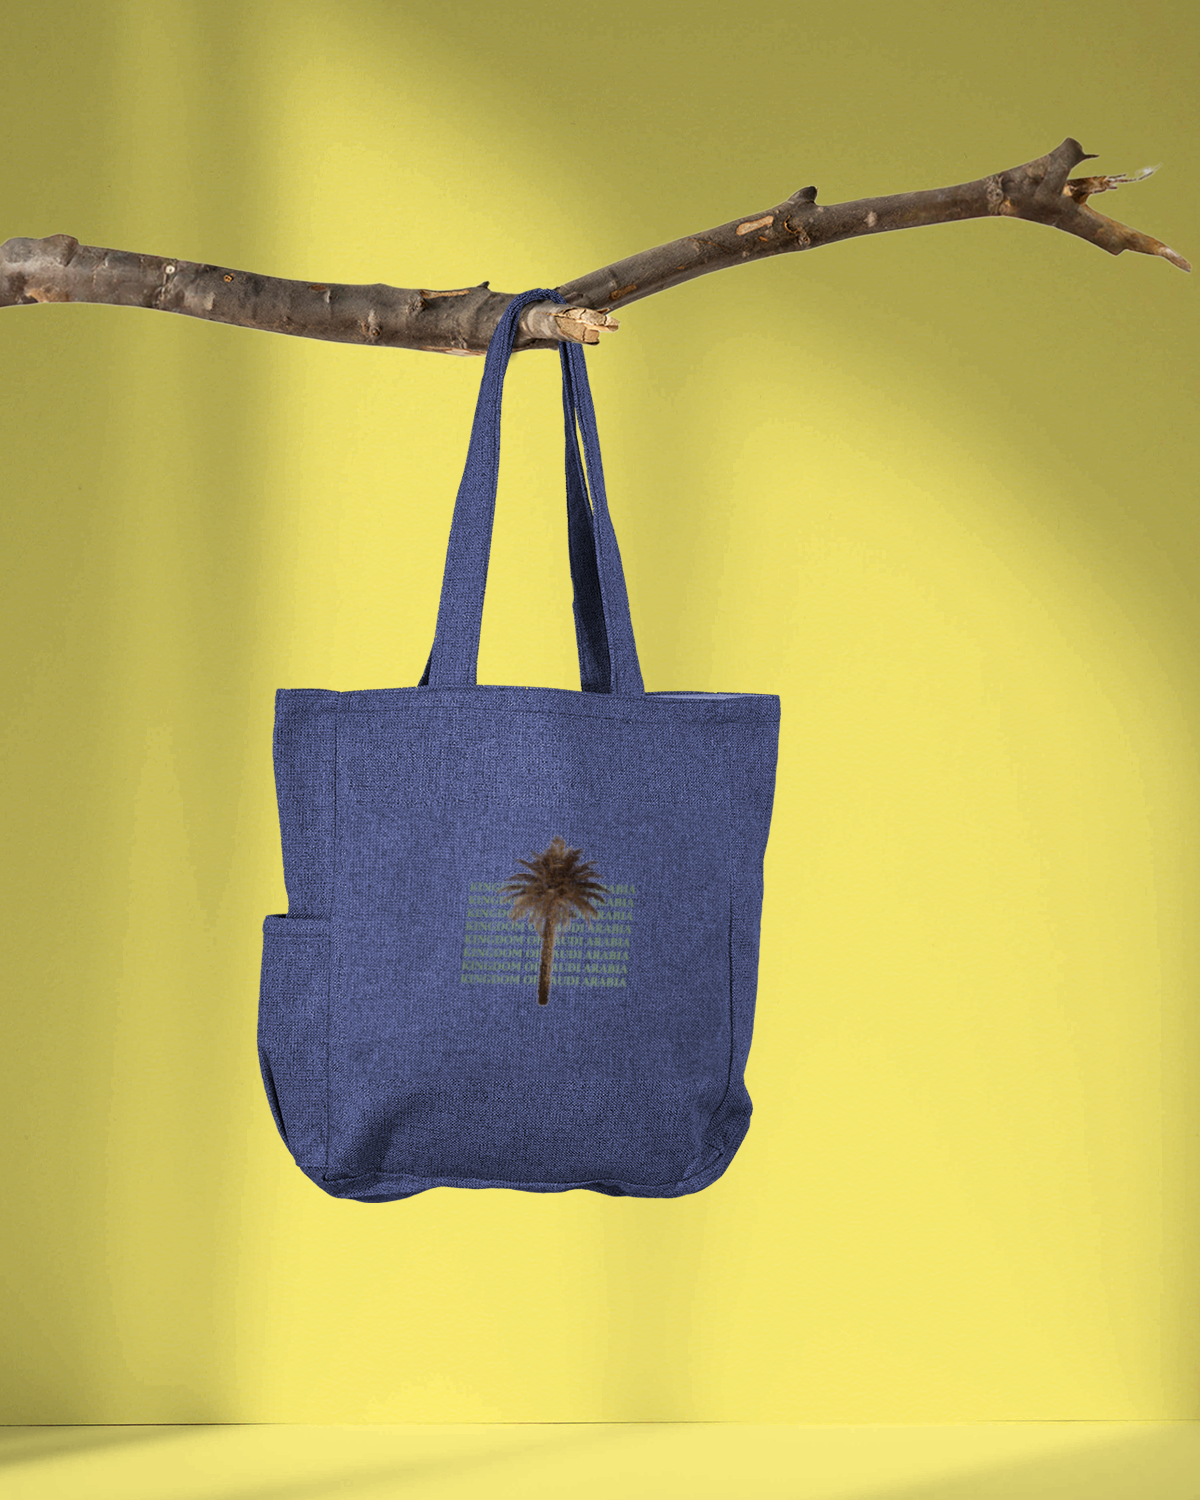 Foundation Day Tote Bag (Palm Tree)